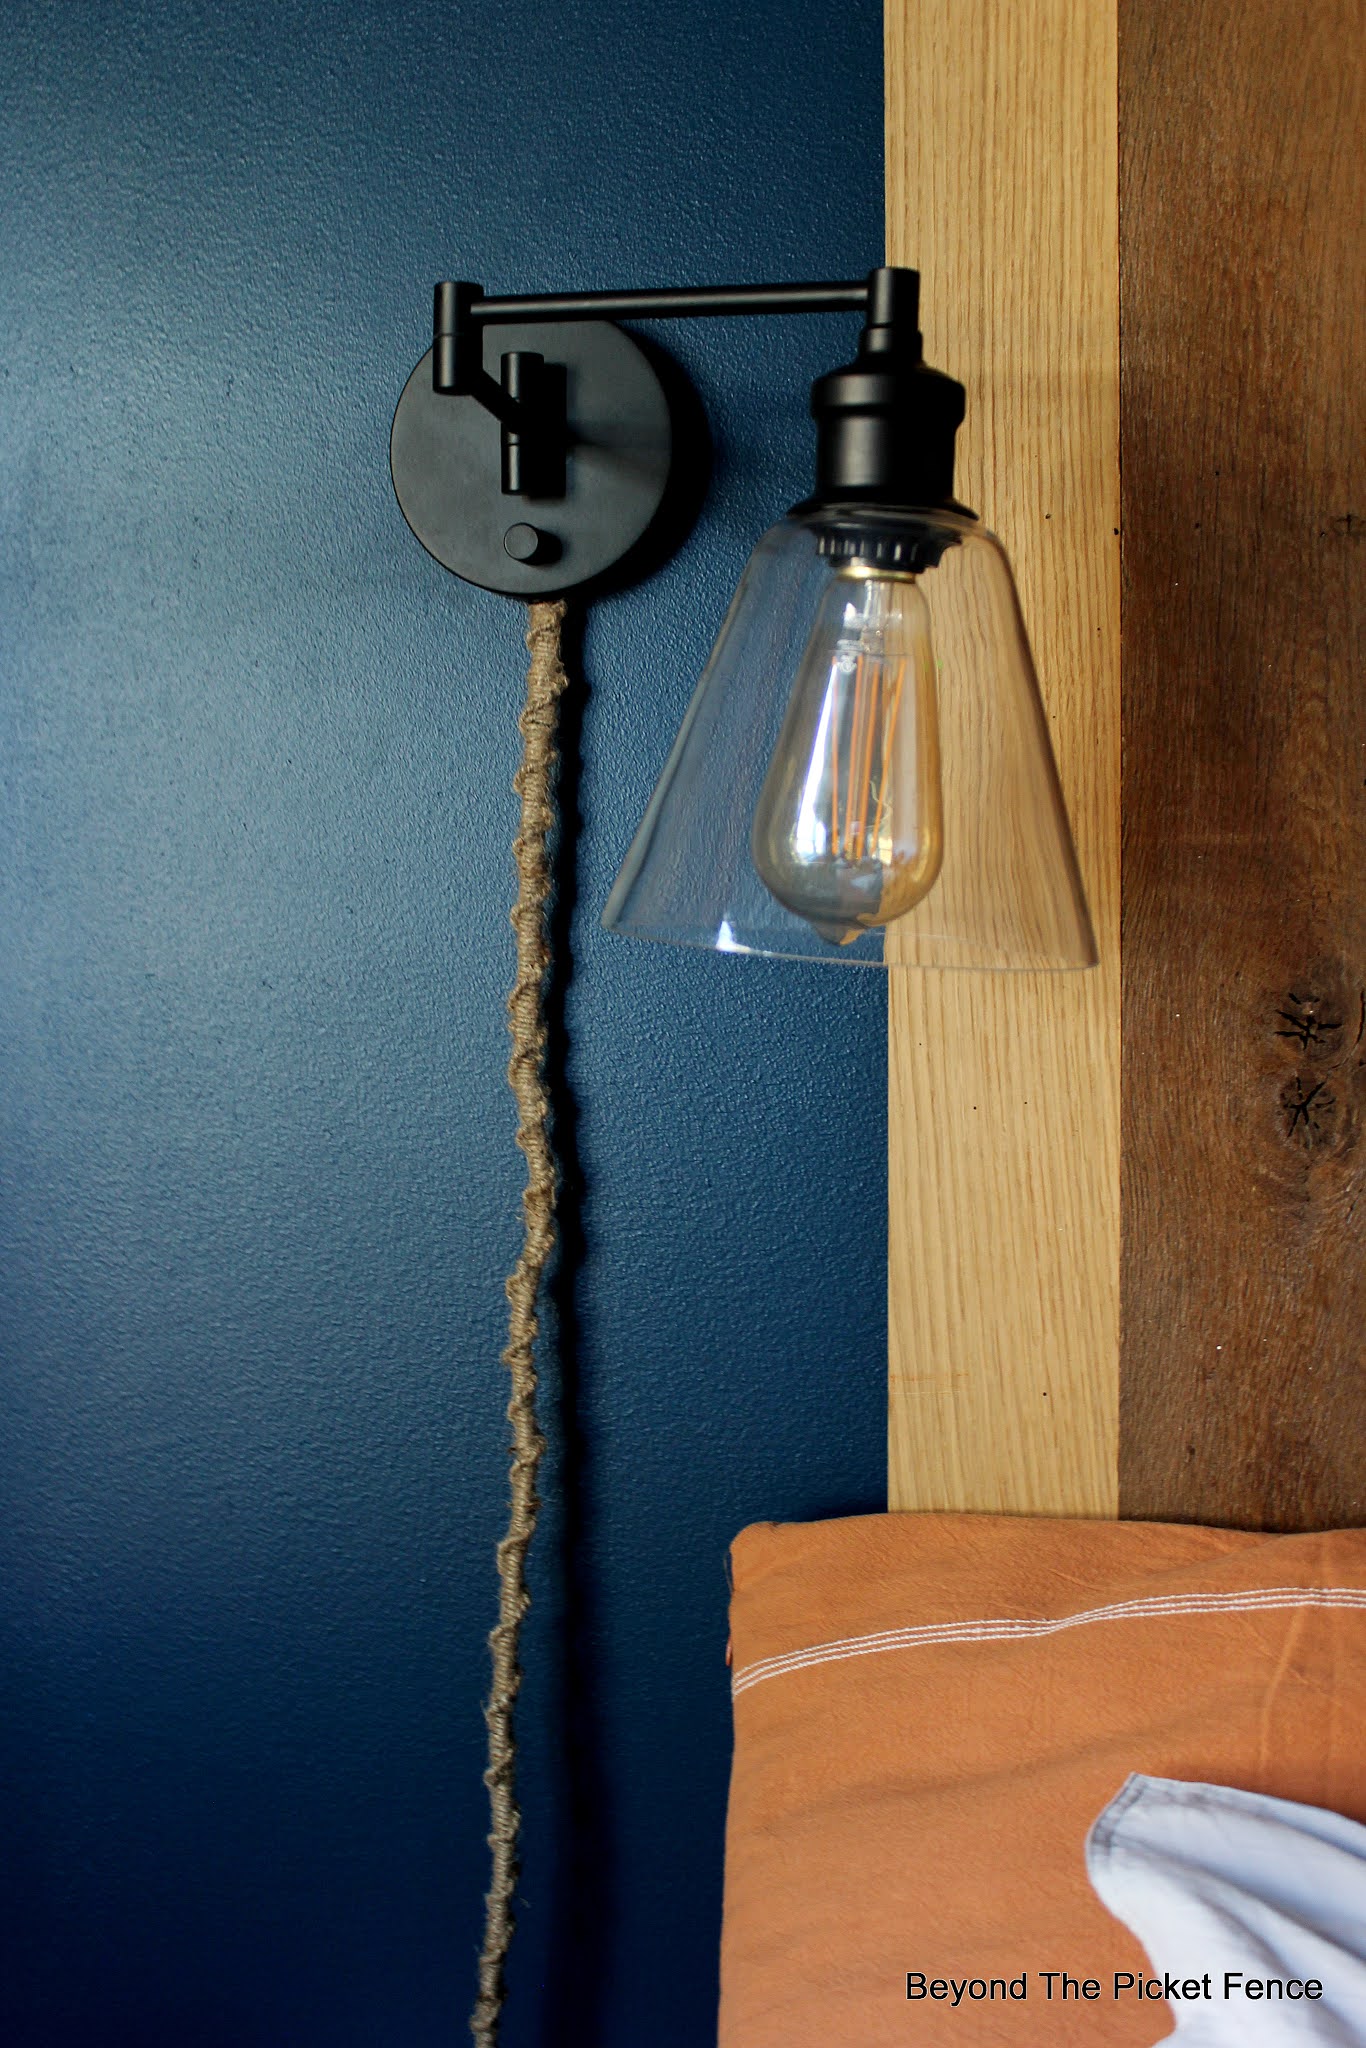 Beyond The Picket Fence: Bedside Lights and How to Macramé Cord Covers